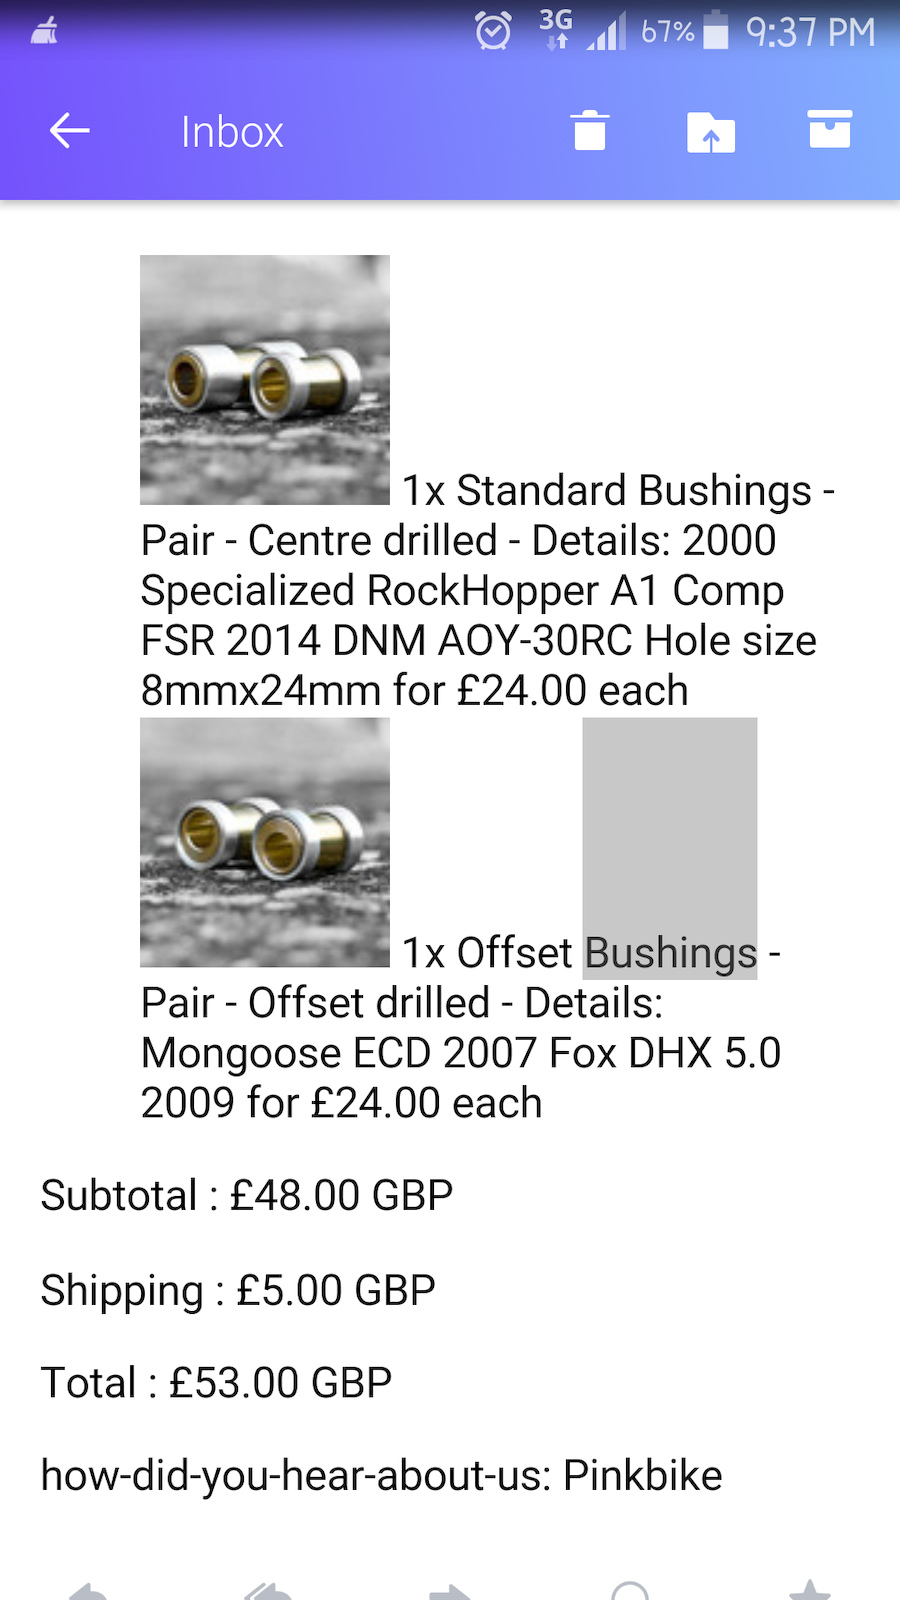 Just ordered These i actually changed my order to both being Offset Bushings .. anyone here got any positive feedback, cant wait to fit these in and try the change in 3/8 inch BB height and about a degree less on head angle